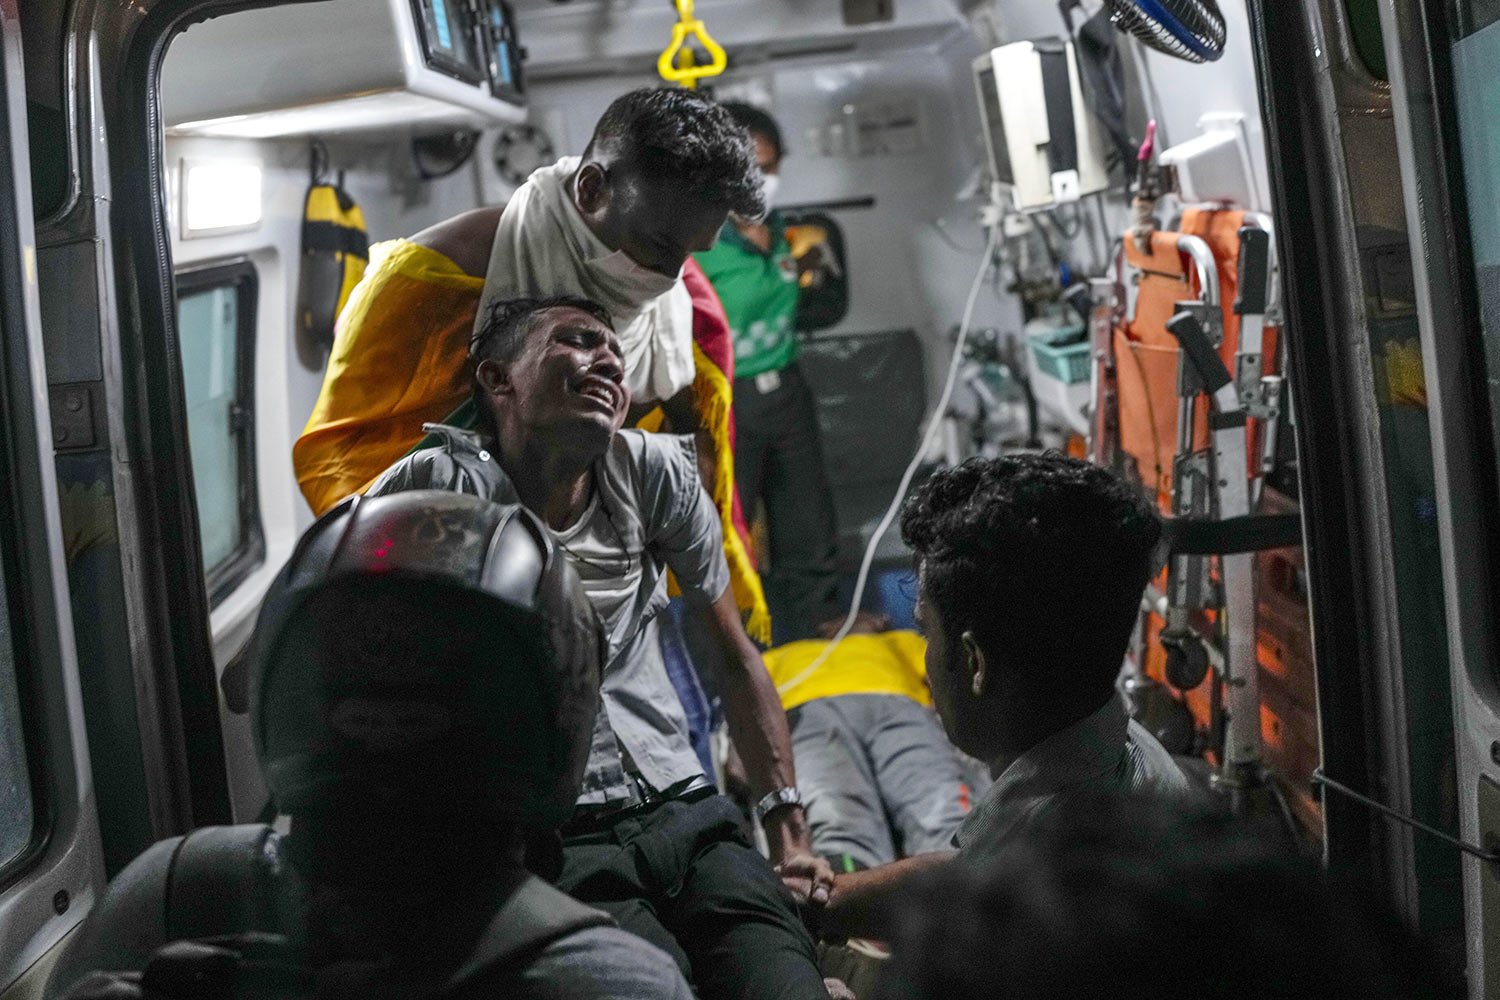  An injured protester is put into an ambulance during clashes with police near Parliament in Colombo, Sri Lanka, July 13, 2022. (AP Photo/Rafiq Maqbool) 